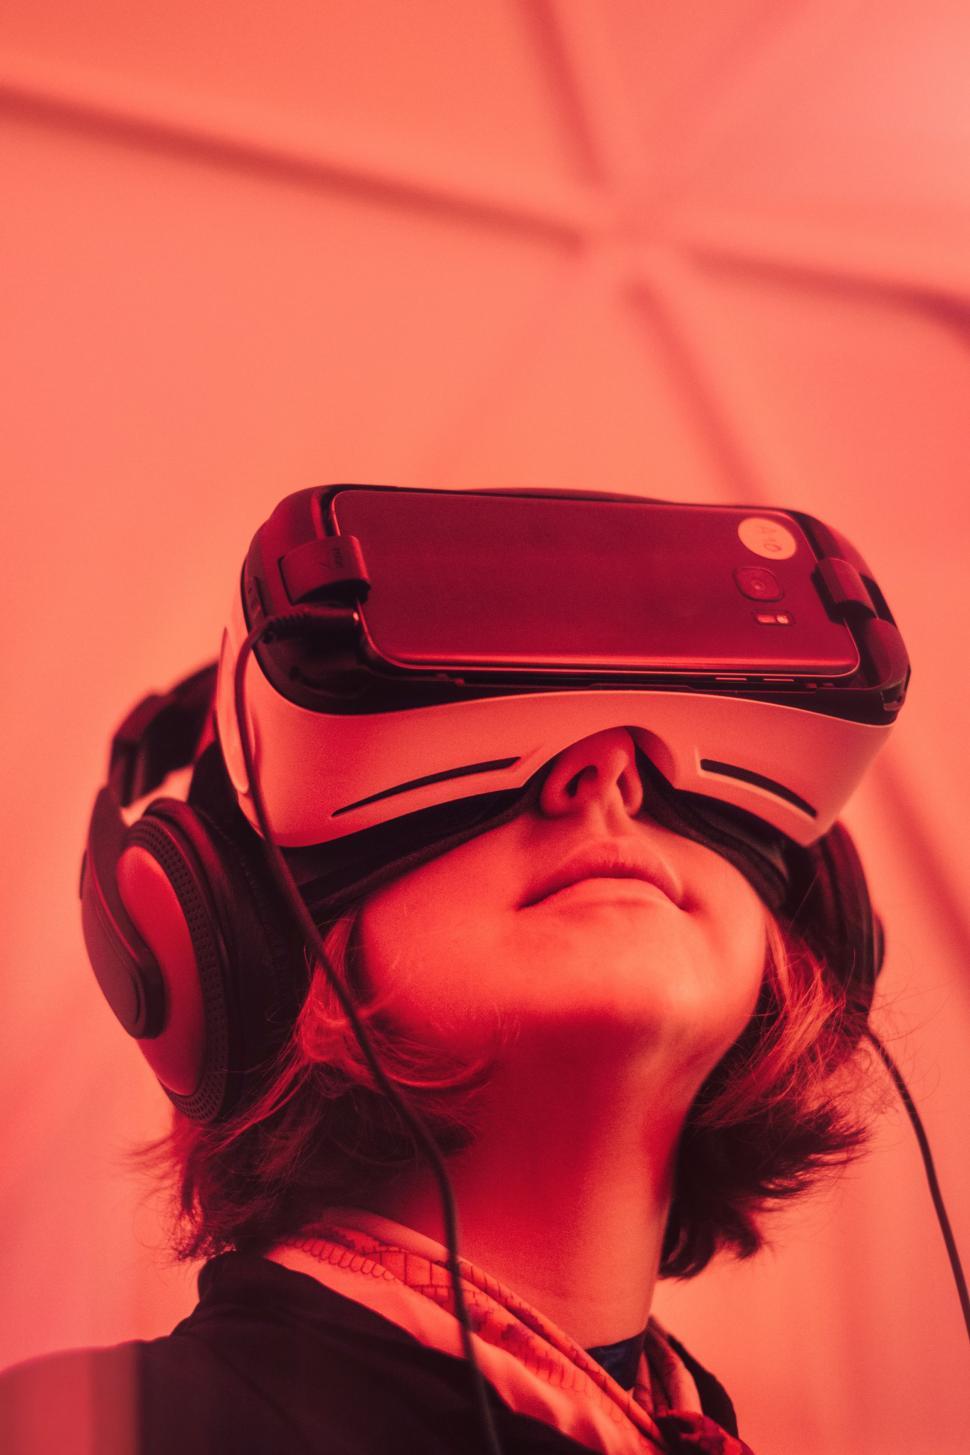 Free Image of Little Girl with VR goggles 